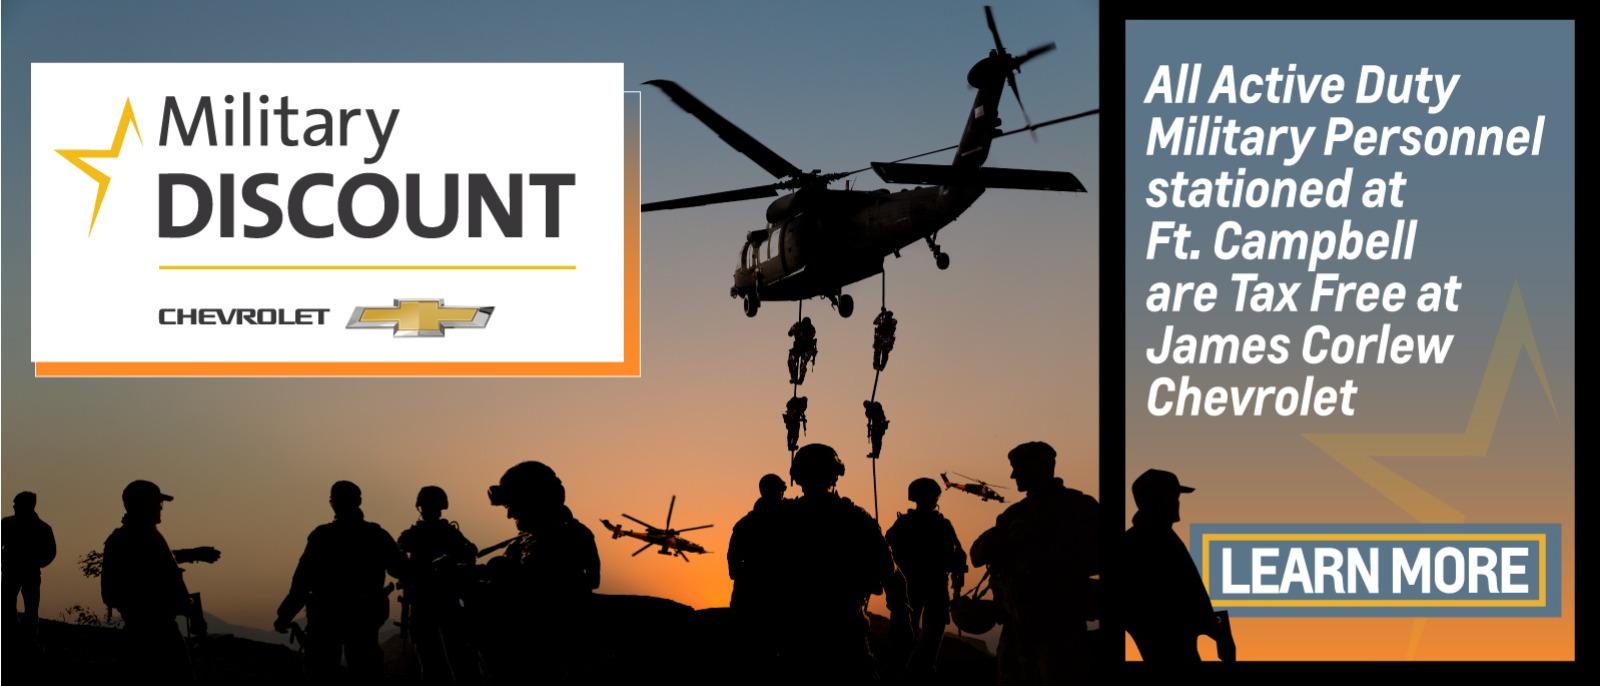 Military Discount for active duty personel stationed at Ft. Campbell. Click to learn more.